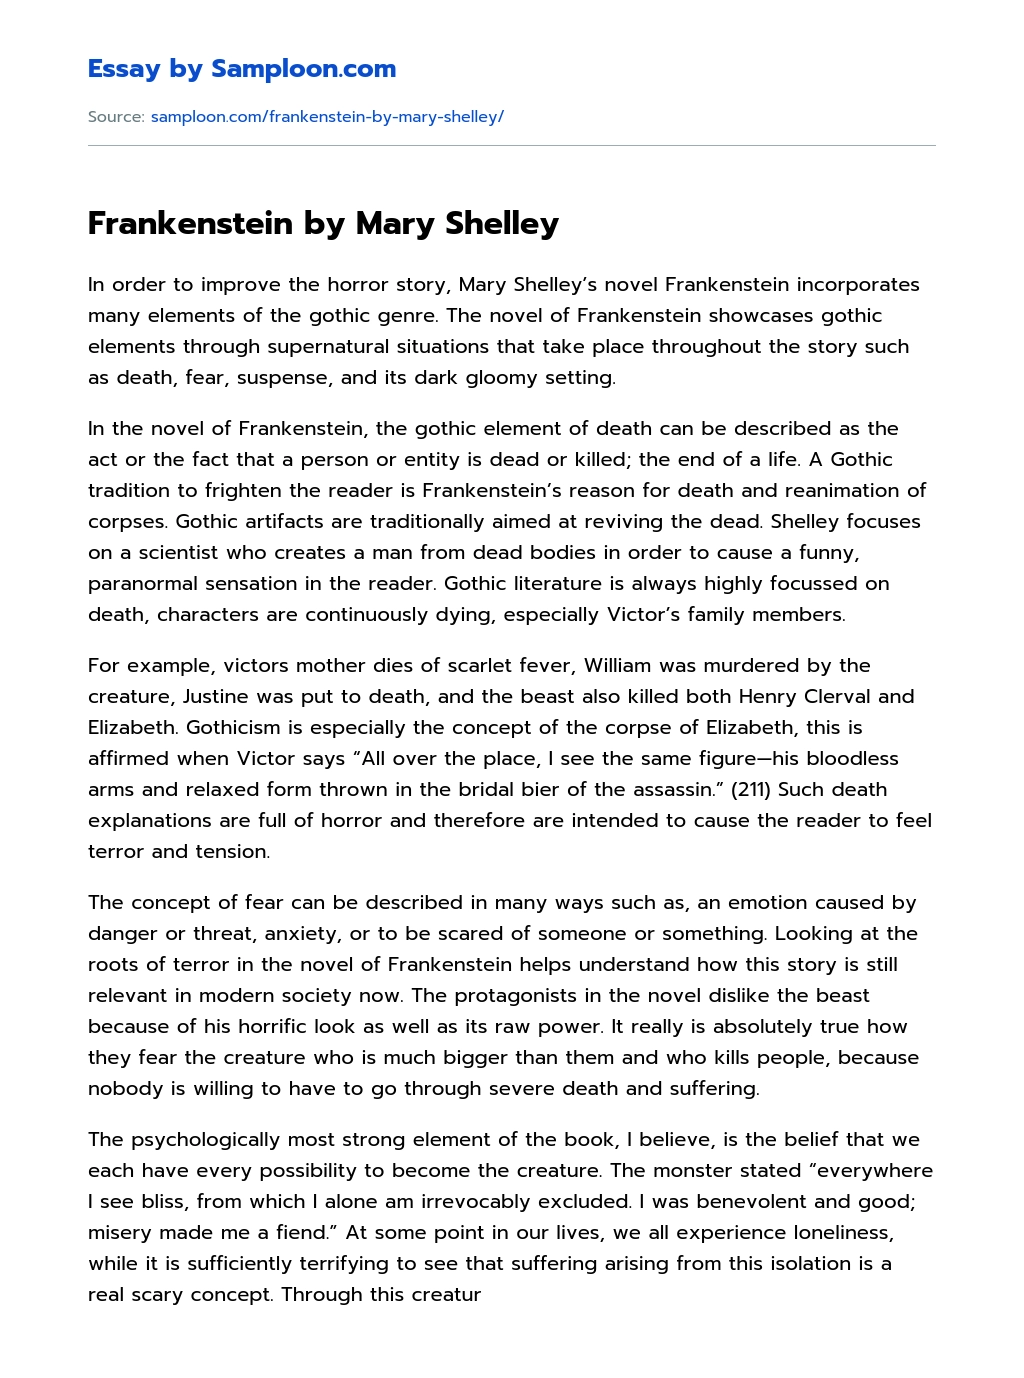 Frankenstein by Mary Shelley essay